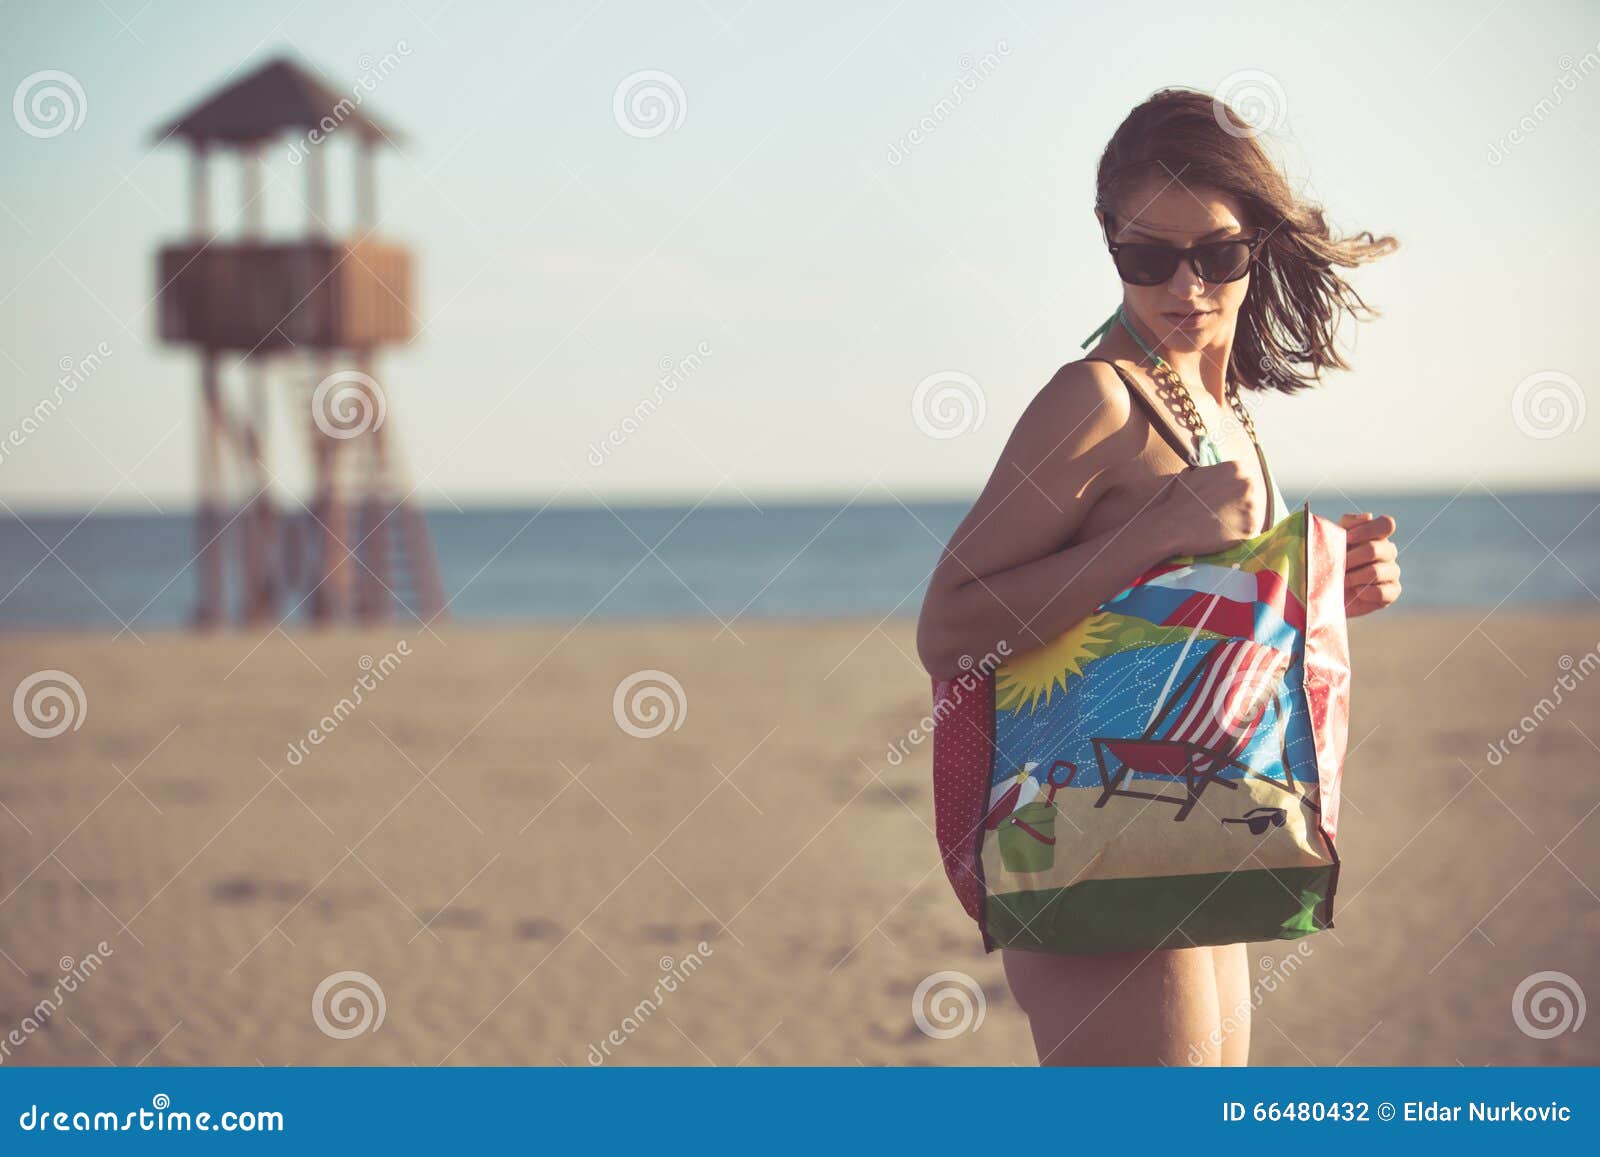 woman on beach vacation with accessories.beach accessory.going to the sandy beach vacation.summer beach fashion style